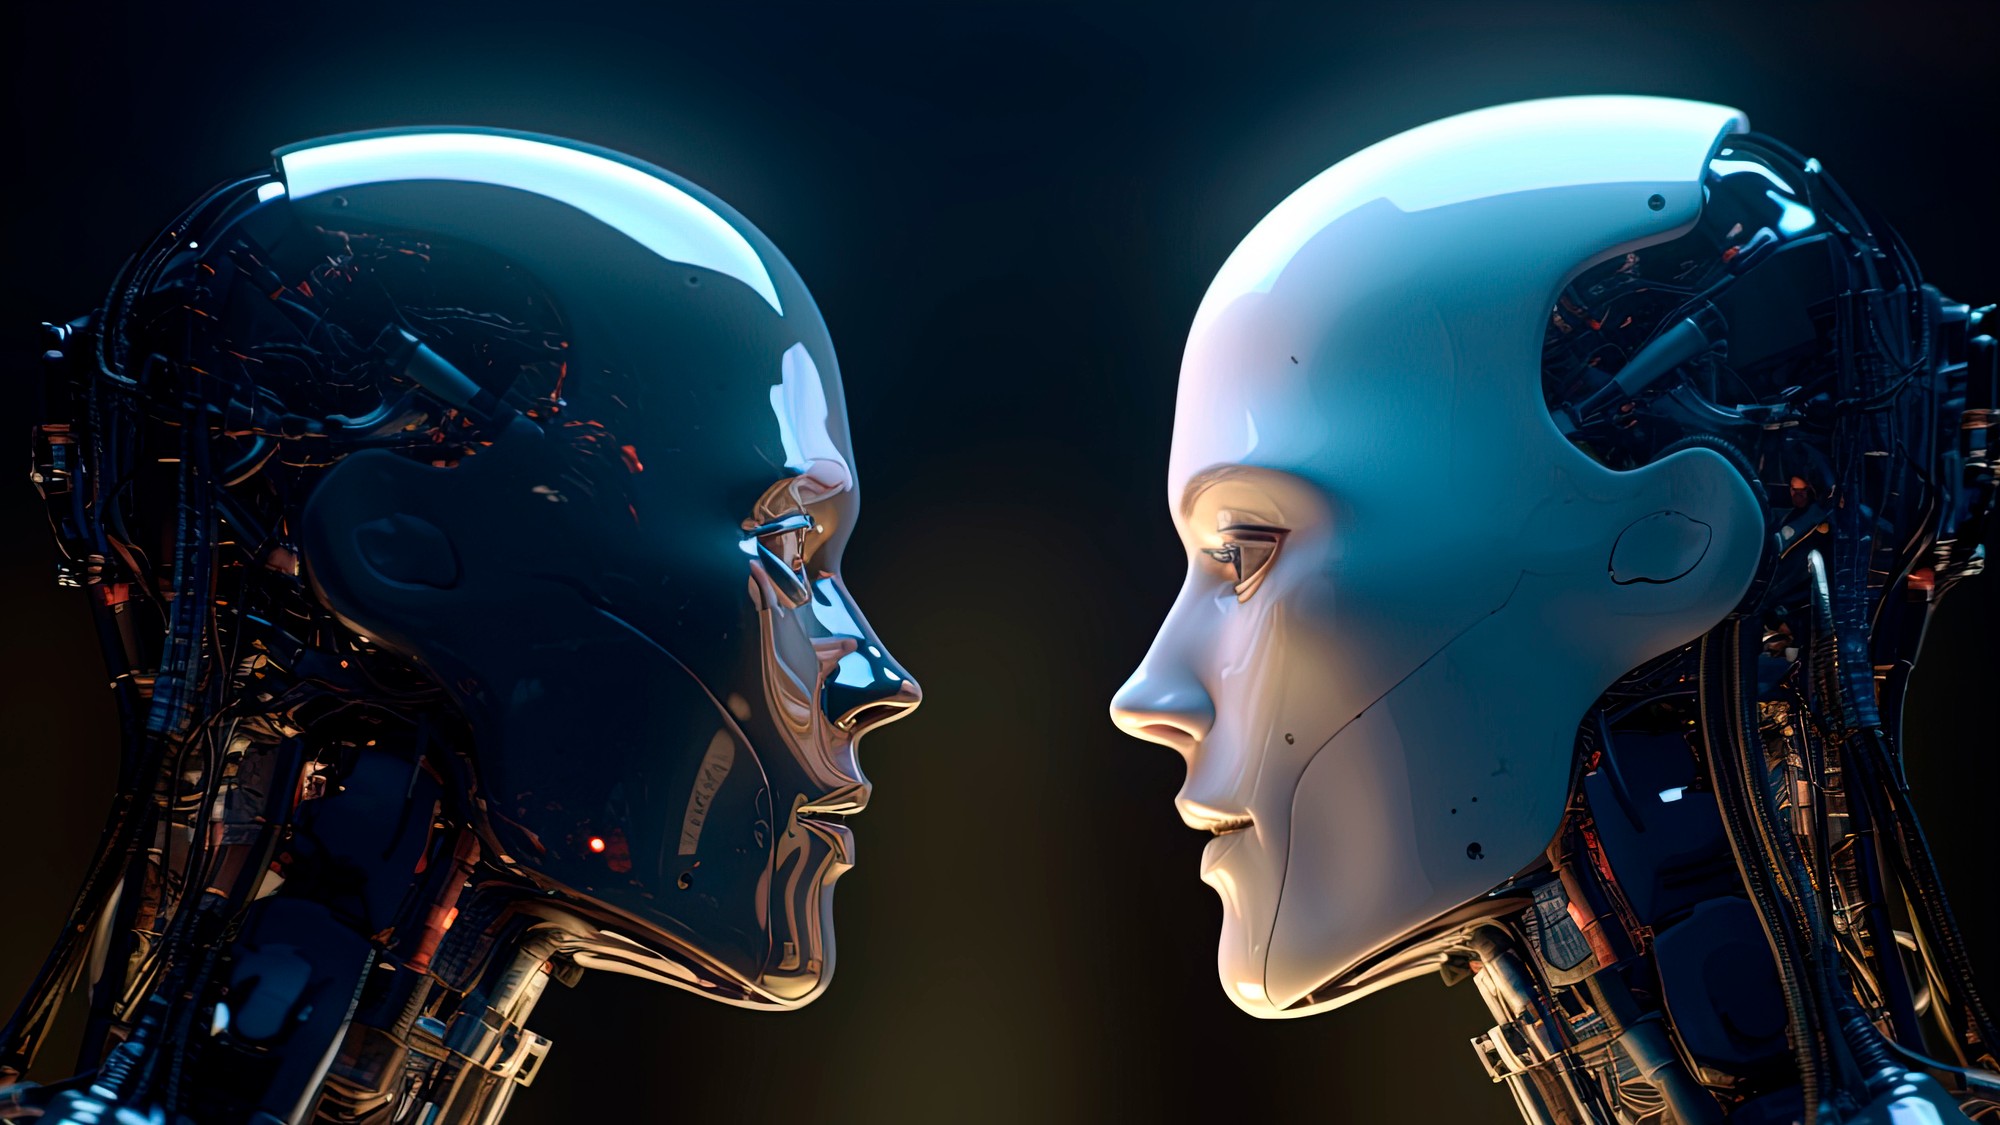  Should AI have rights? 